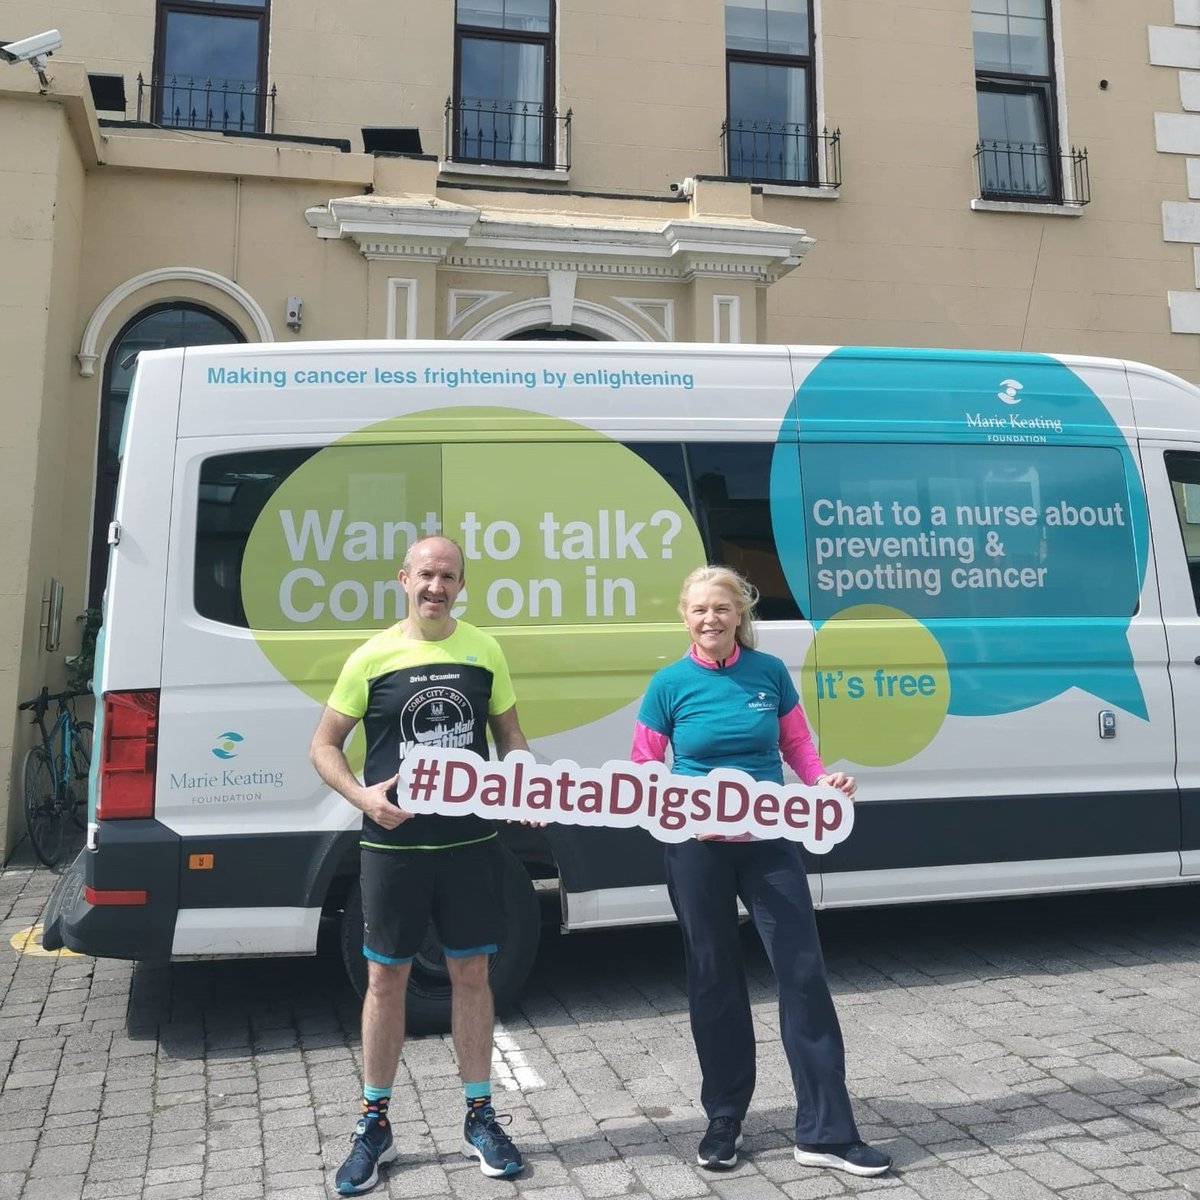 Our Clayton Hotel teams will be taking part in the Great Dalata Run at Cork City Marathon on 5th June to raise funds for the Marie Keating Foundation. We’re delighted to have this event back! If you’d like to make a donation, please find the link below: ow.ly/29QT50JgOwQ